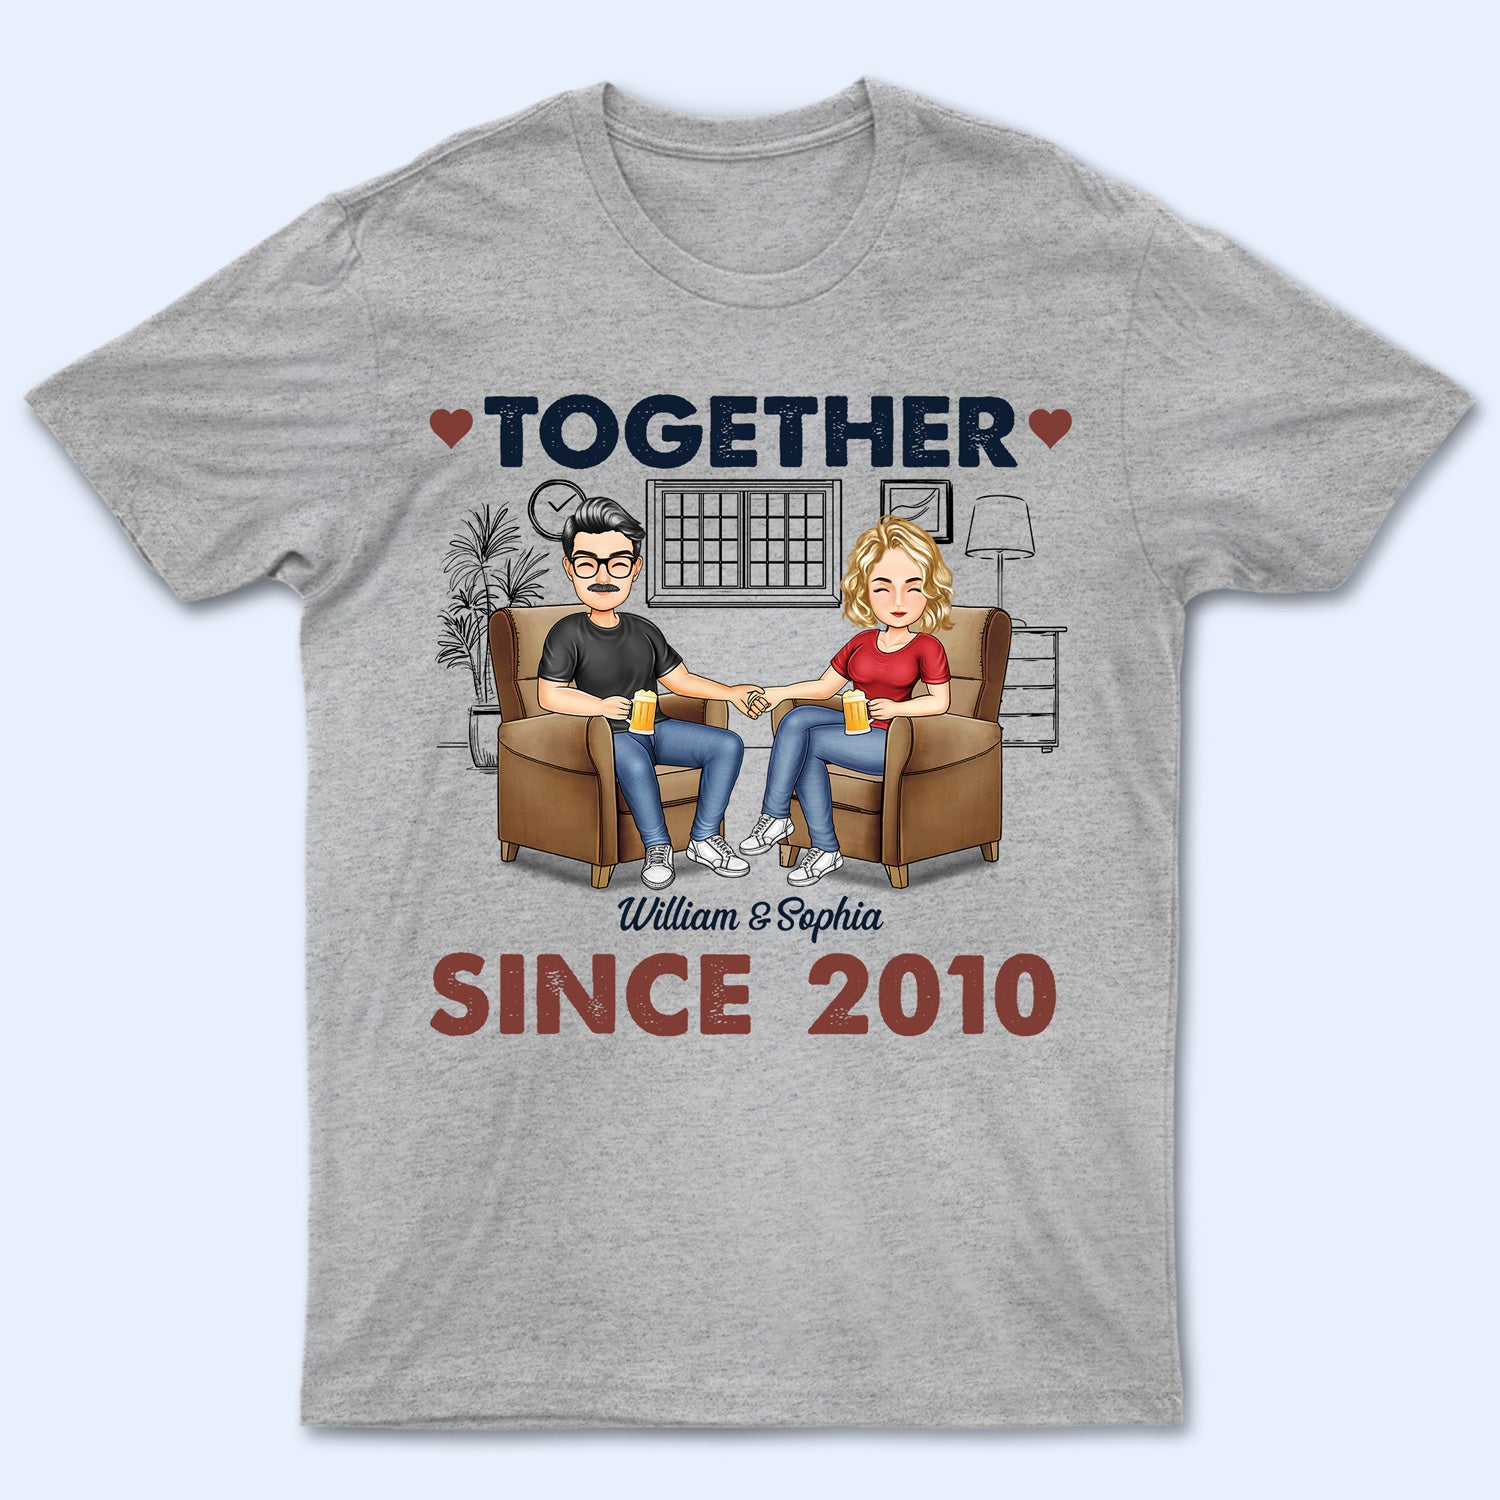 Together Since - Anniversary, Birthday Gift For Spouse, Lover, Husband, Wife, Boyfriend, Girlfriend, Couple - Personalized Custom T Shirt